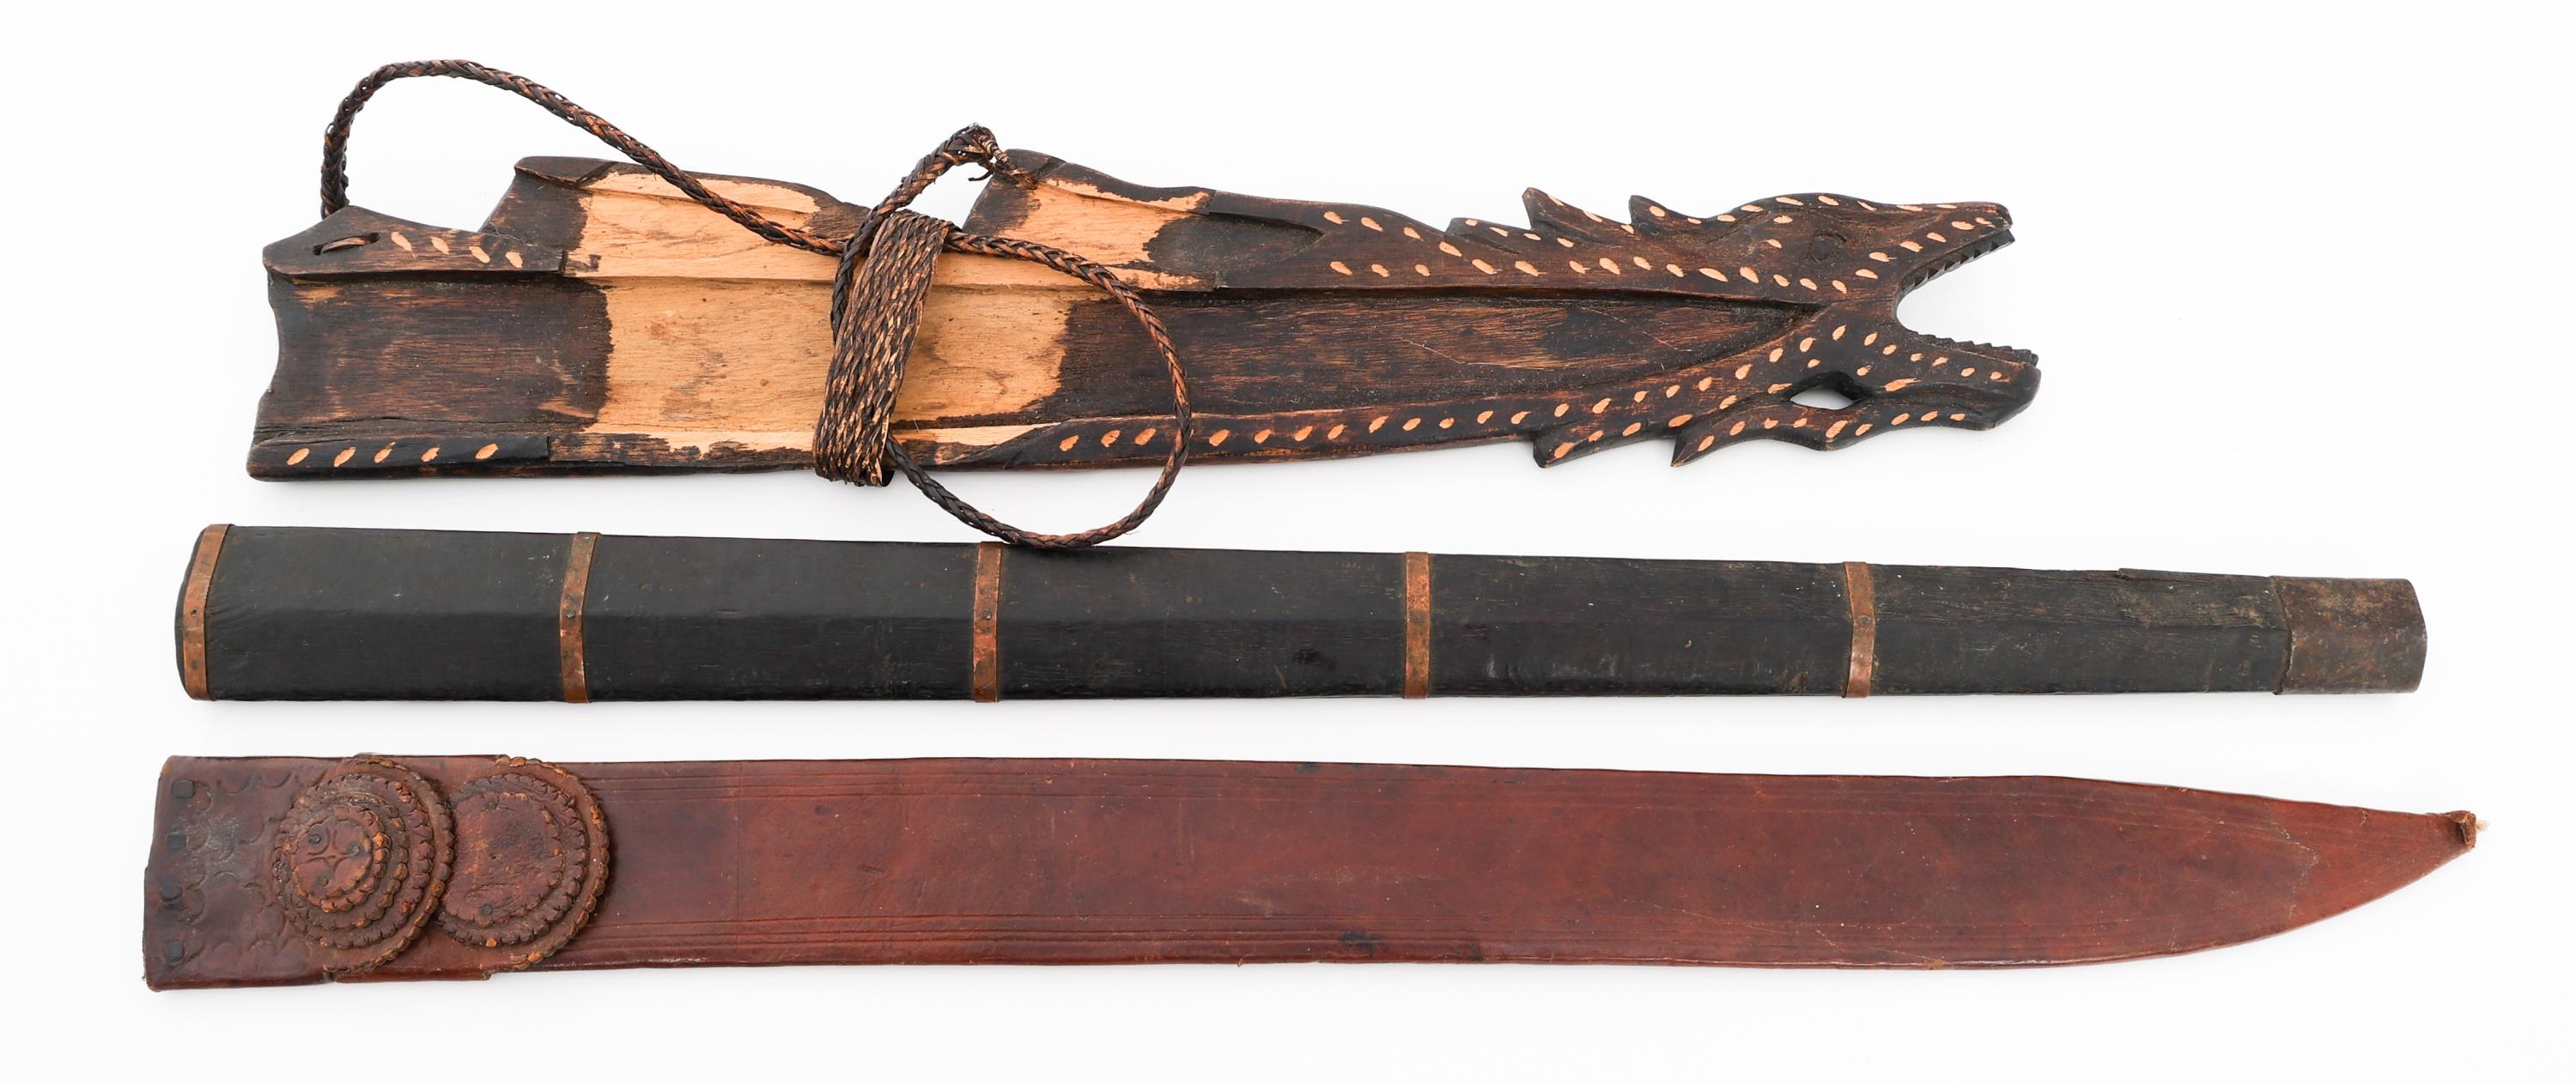 SOUTHEAST ASIAN SWORDS WITH SCABBARDS